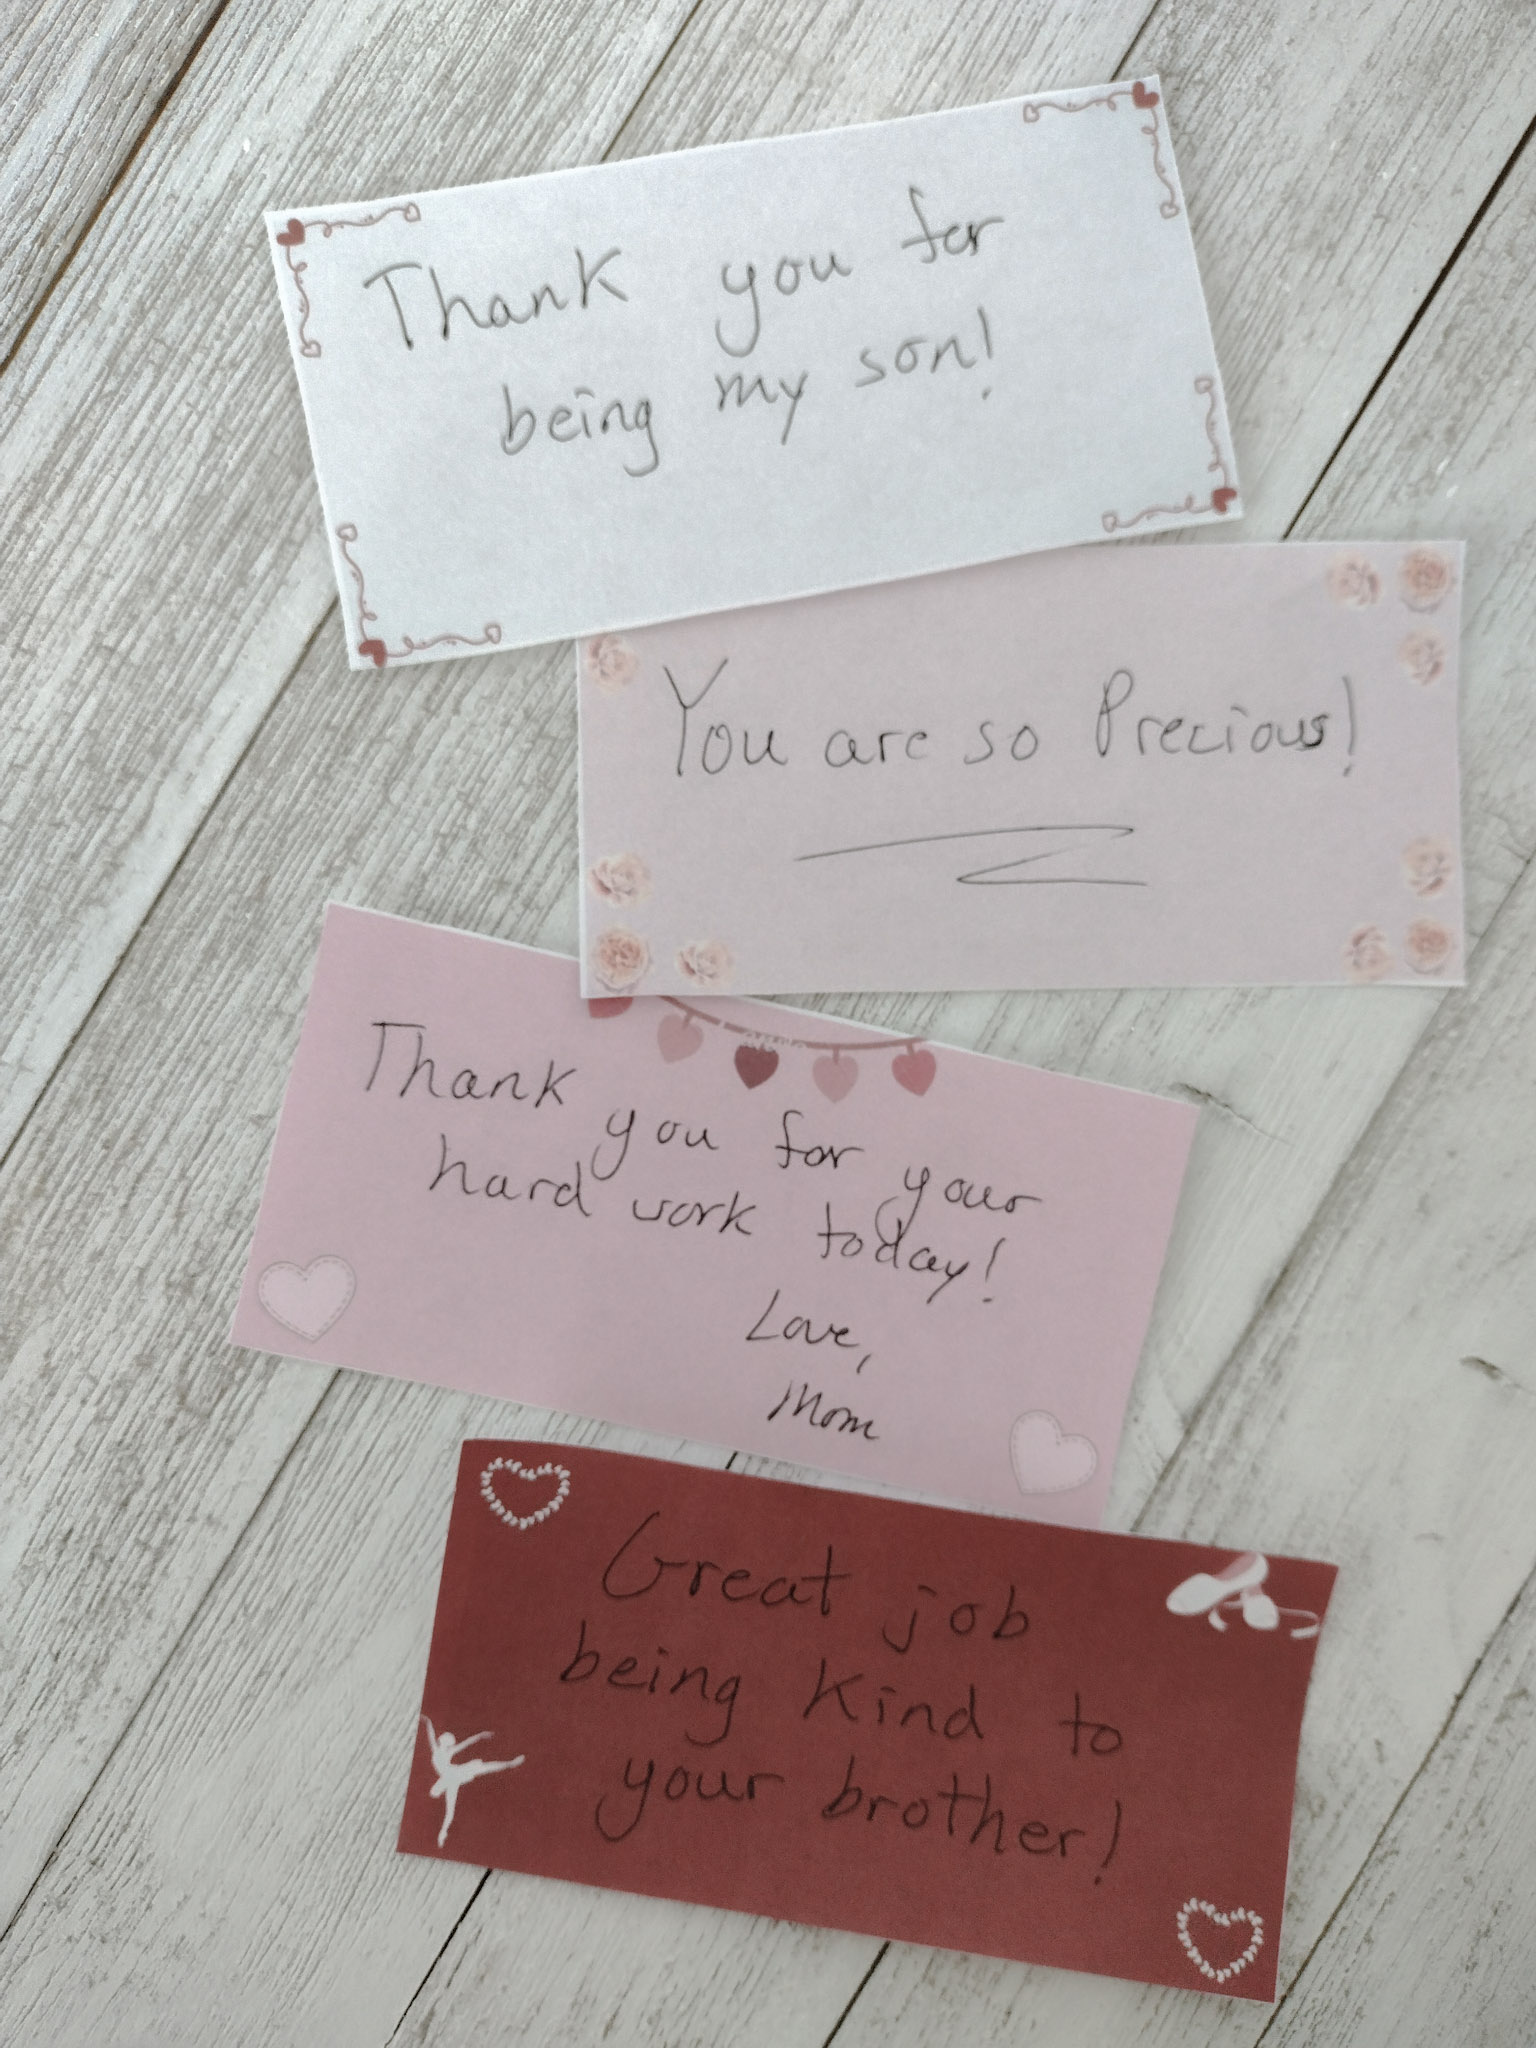 Valentines day cards with love messages on them